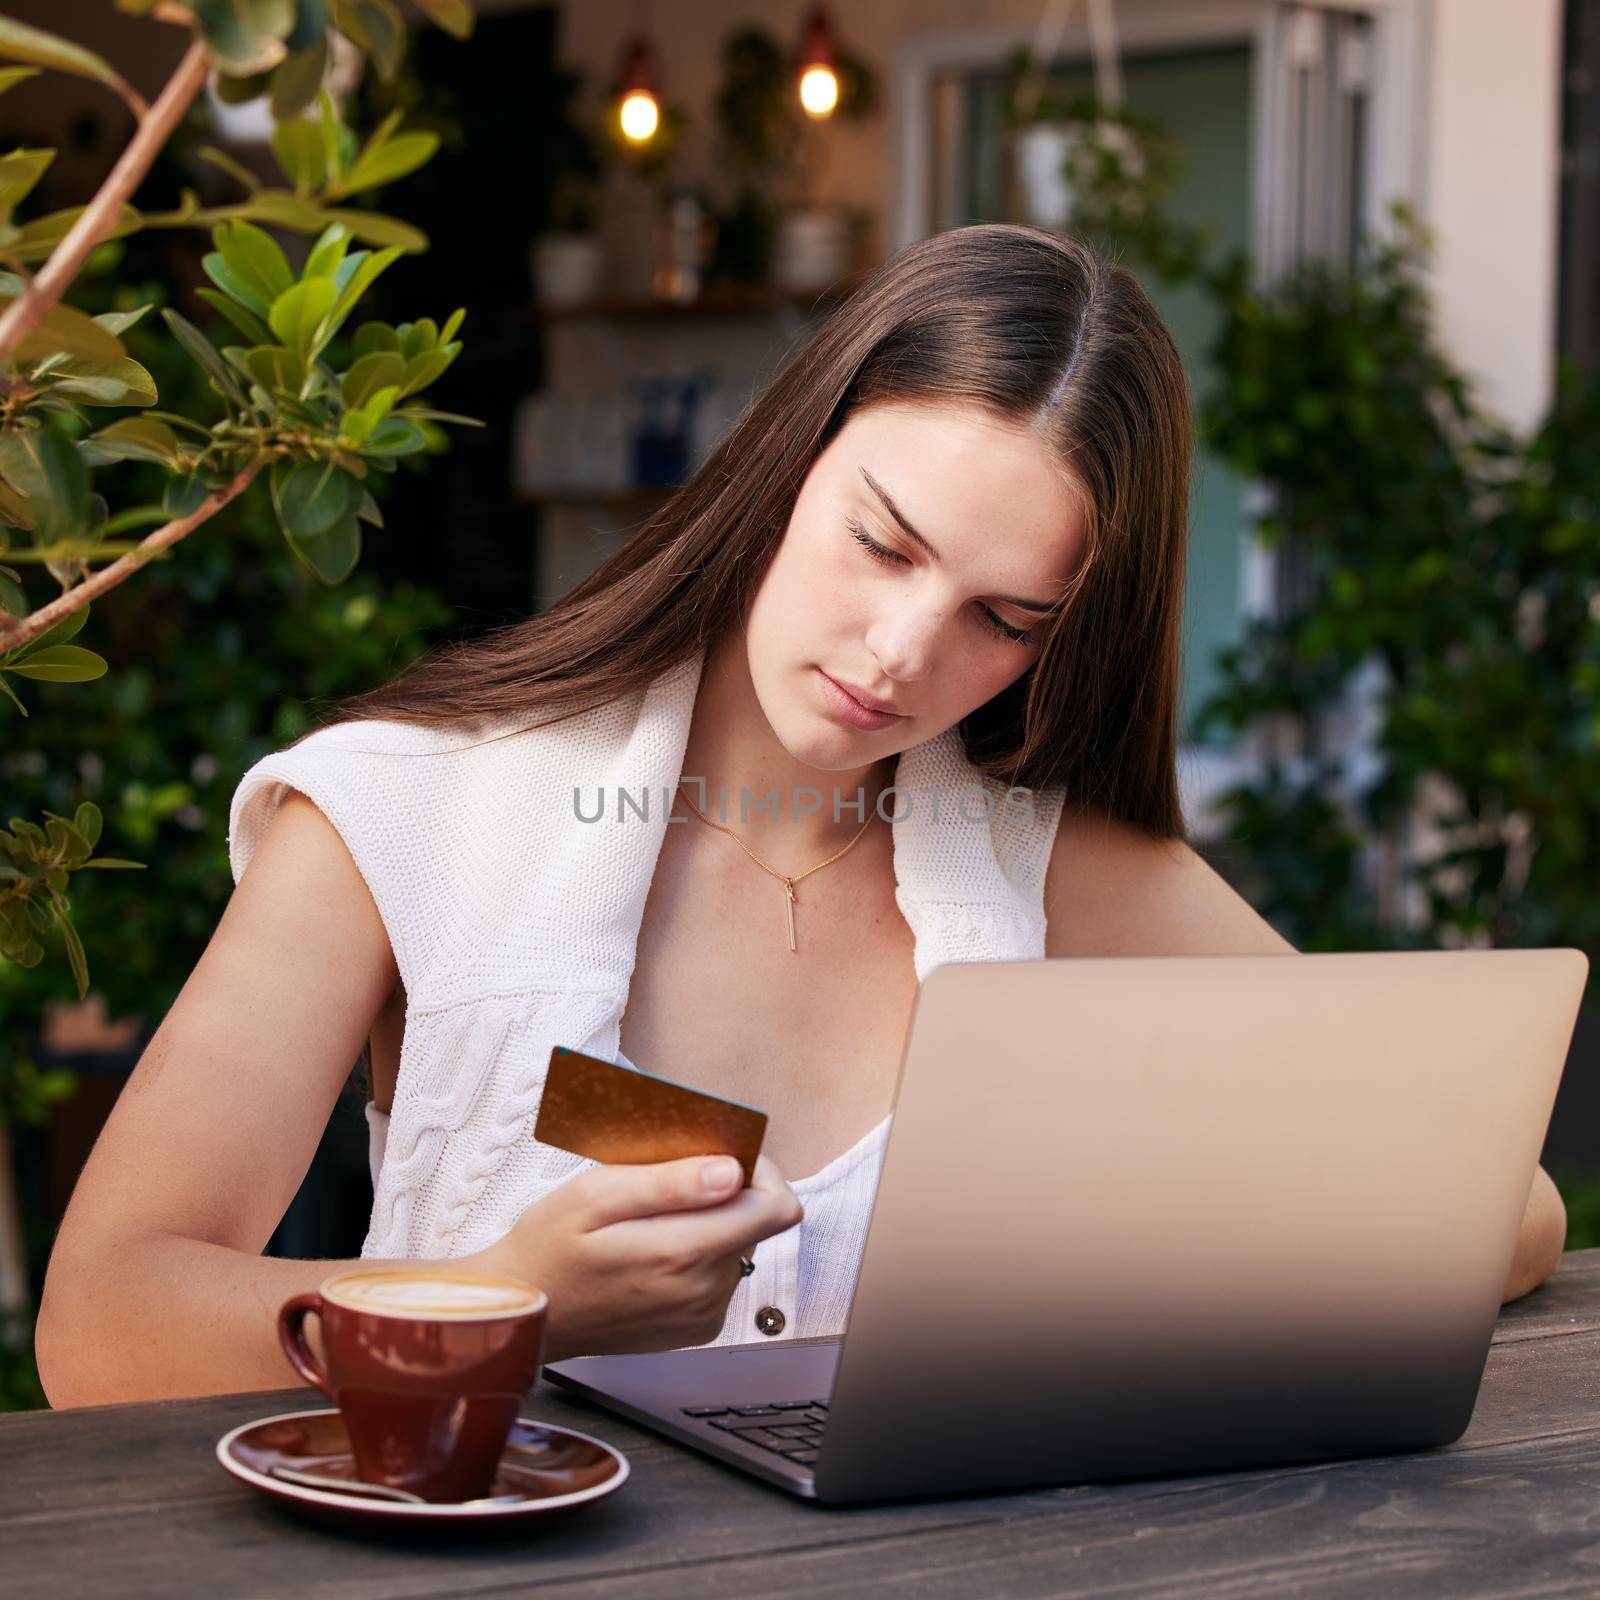 Shot of a young woman using her debit card to shop on her laptop.